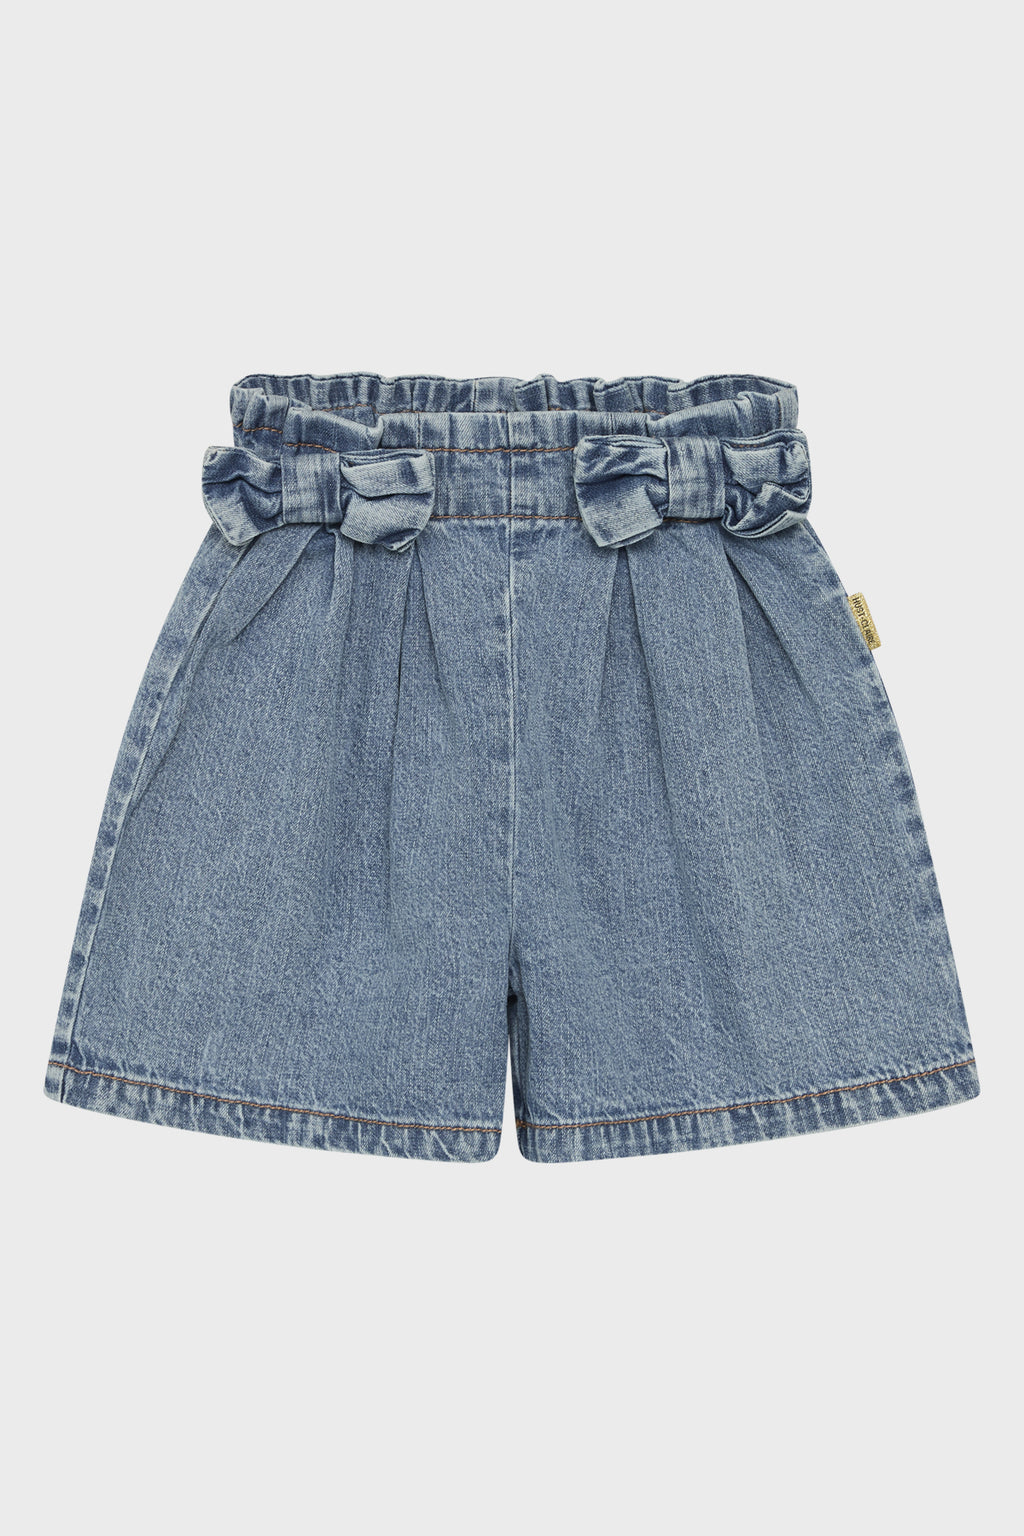 Hust and Claire Herla Jeans Shorts